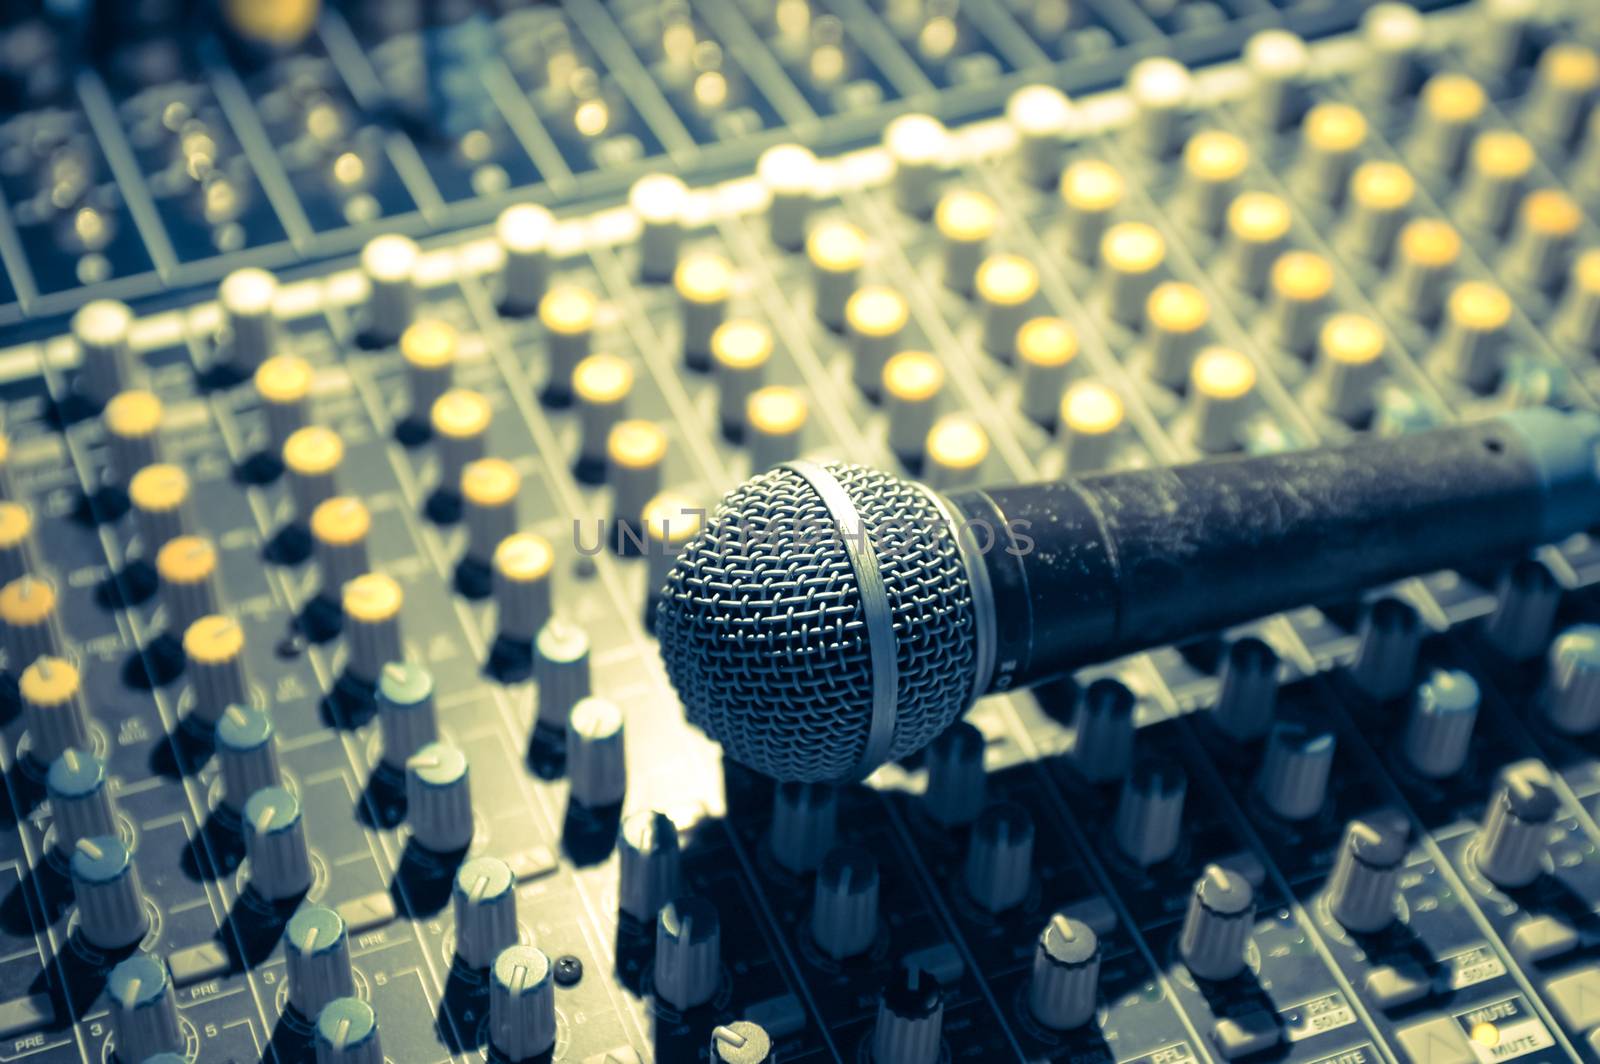 soundboard and microphone by nelsonart